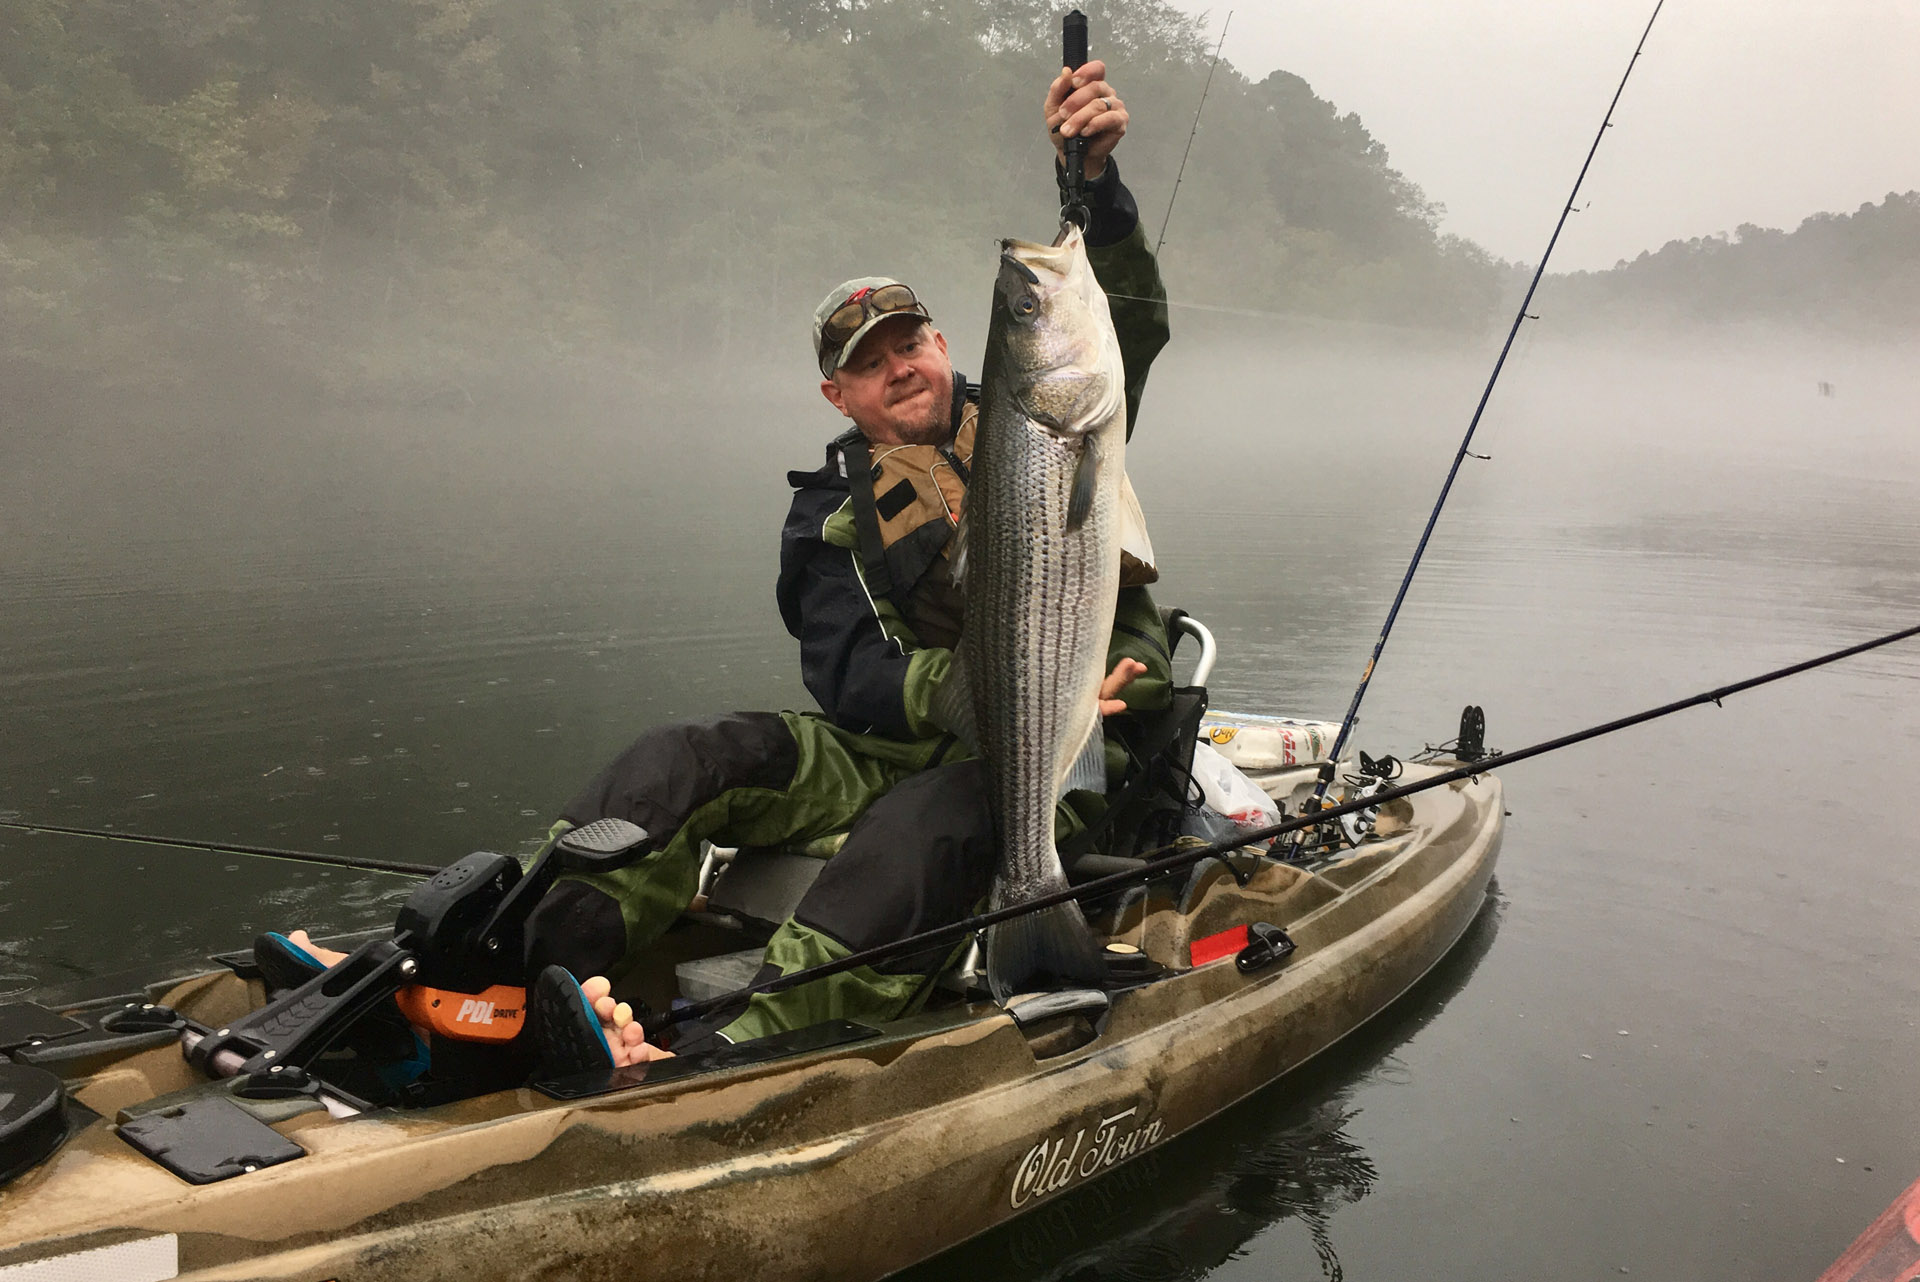 Competitive Kayak Angler Alert, FLW and Kayak Bass Fishing Partner —  TheBBZ.com - The Big Bass Zone - theBBZtv - How to Catch Monster Bass &  Other Fish - Fishing Videos &